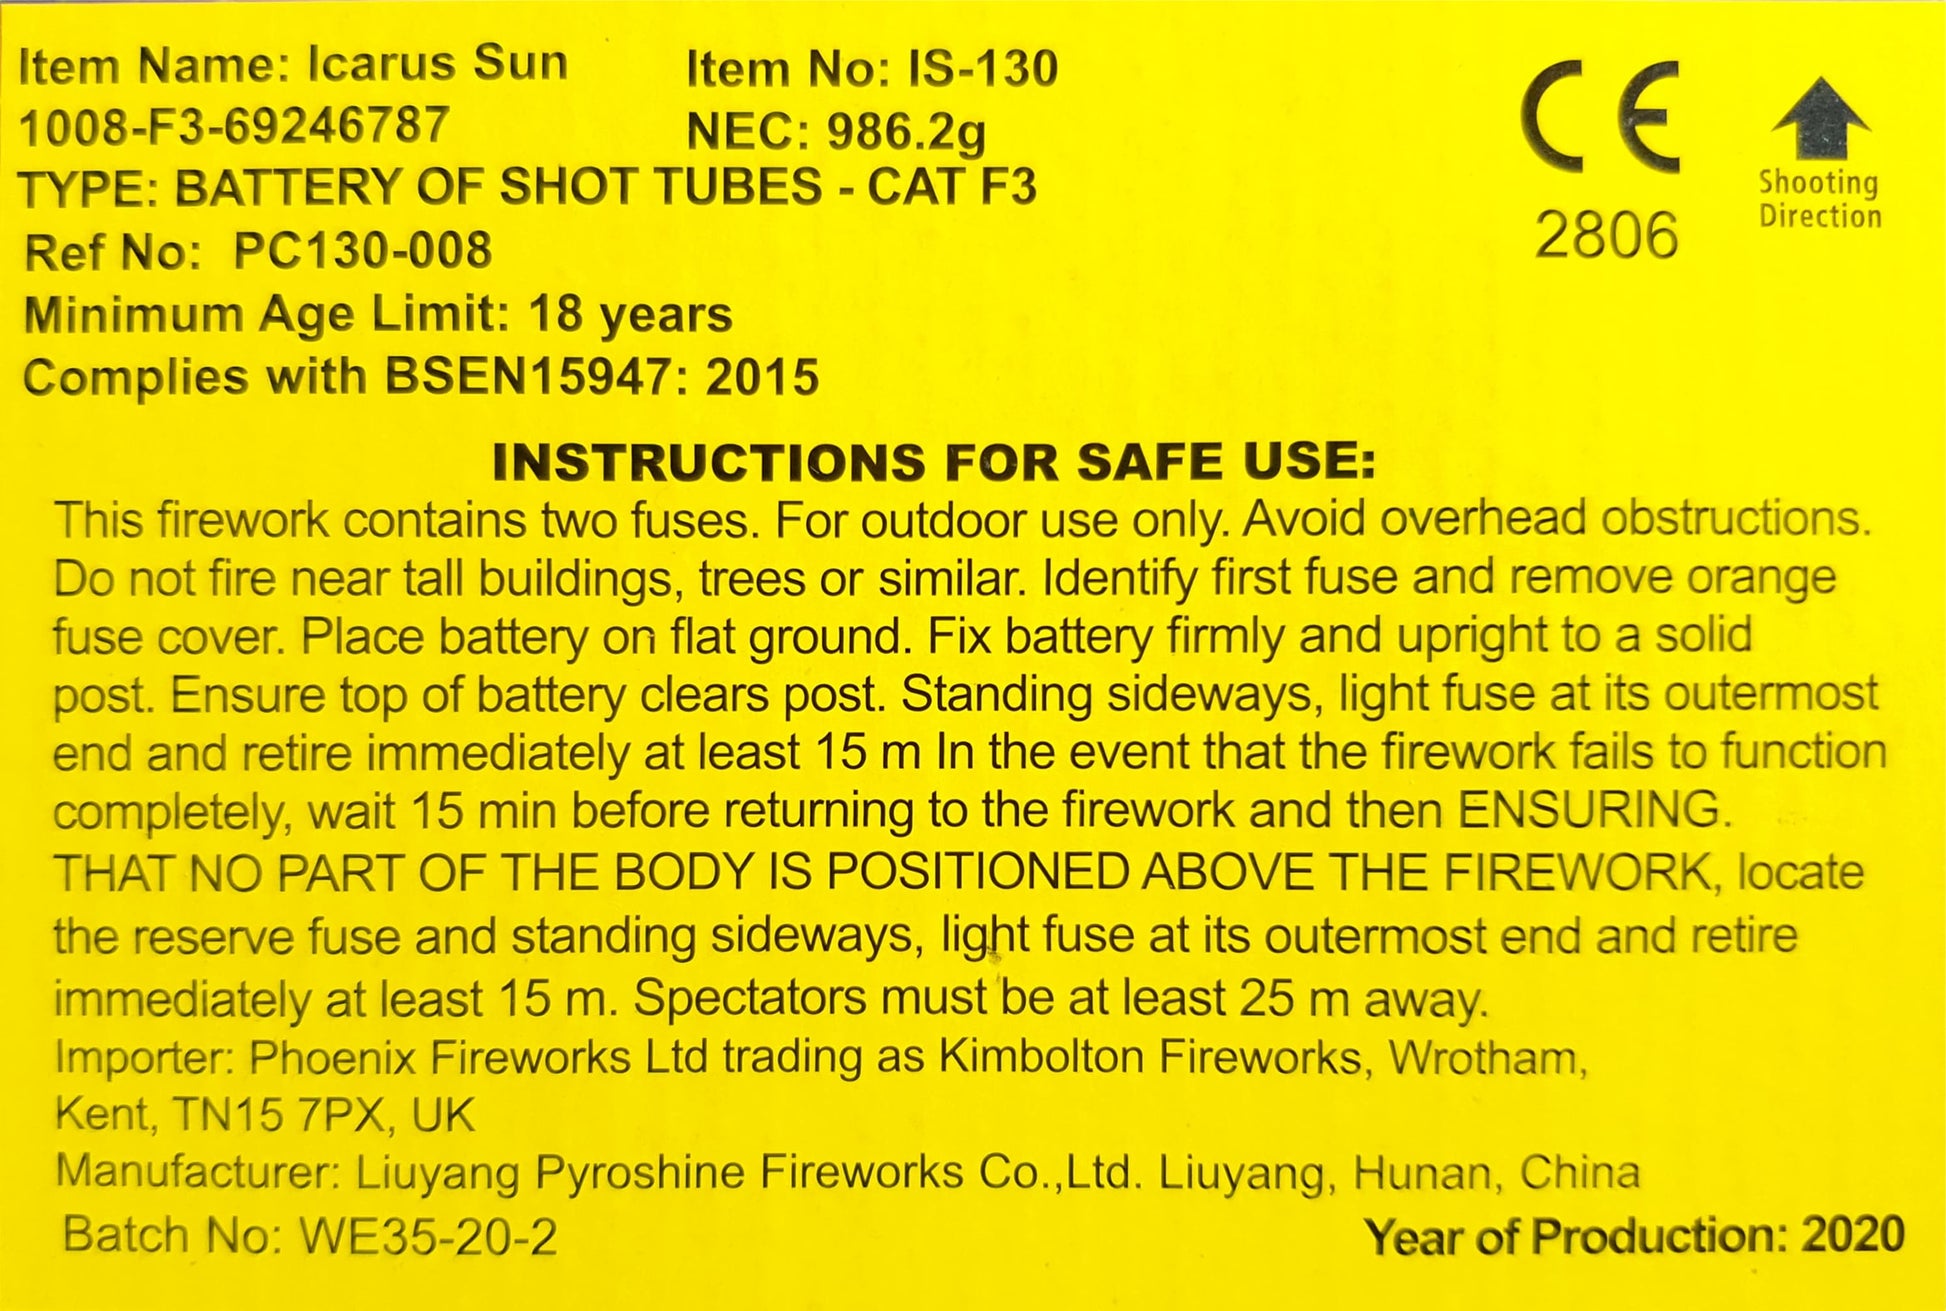 Icarus Sun by Kimbolton Fireworks Instructions